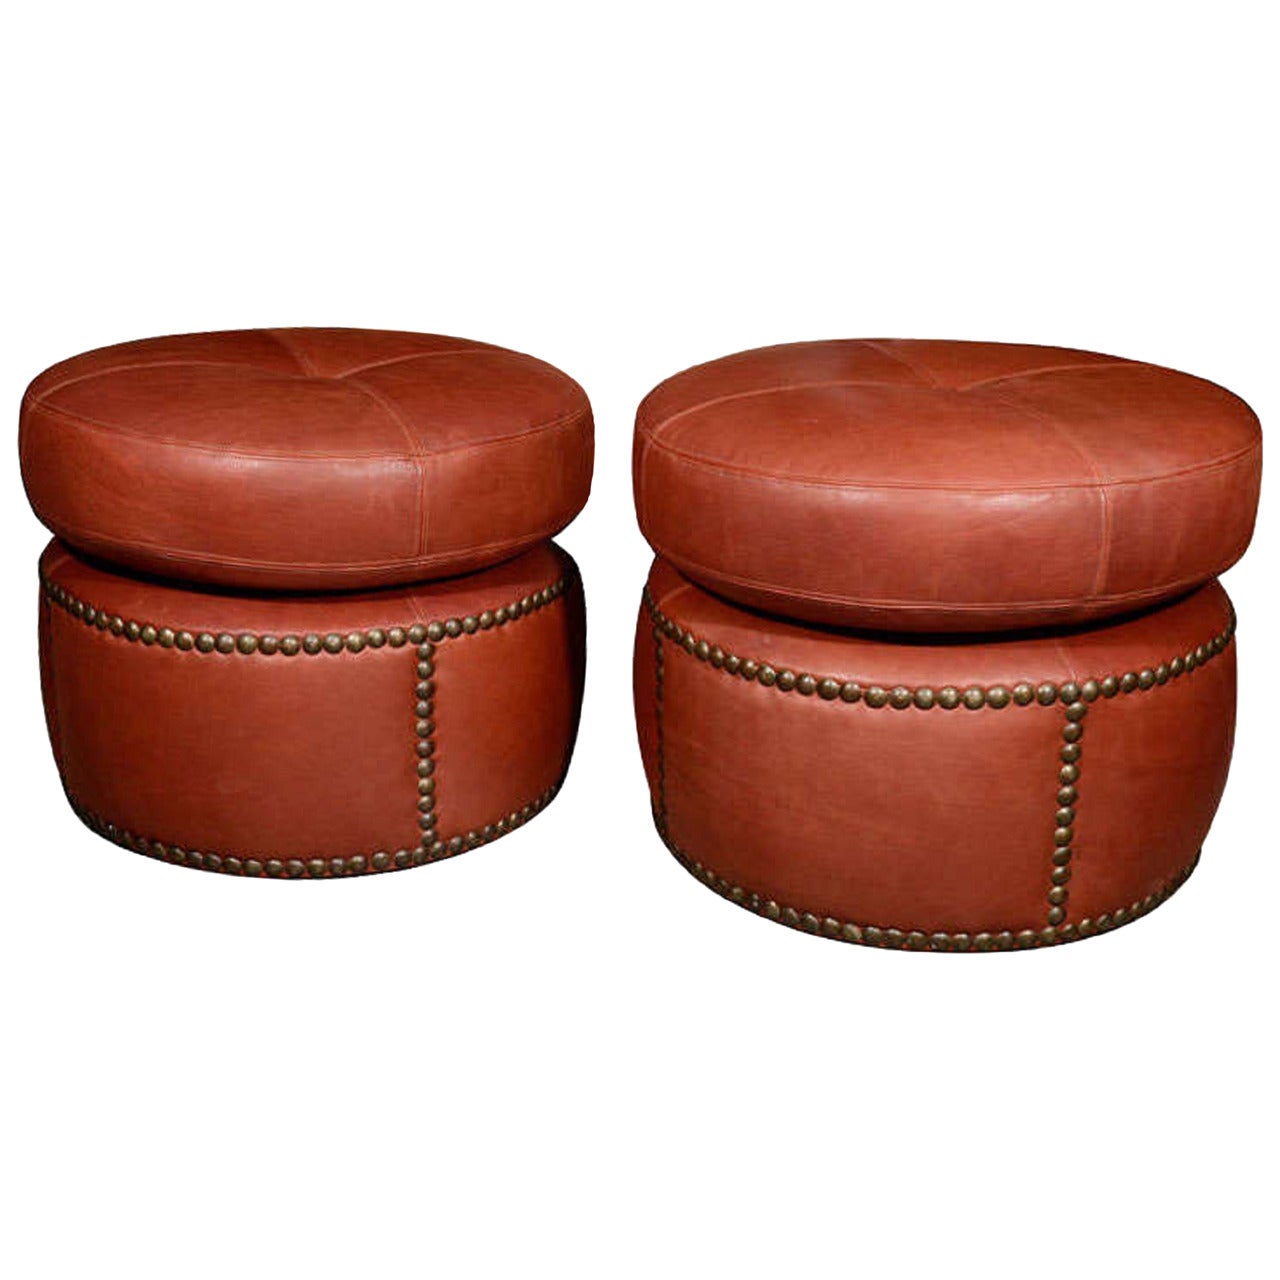 Pair of Leather Studded Poufs, French, 1920s For Sale